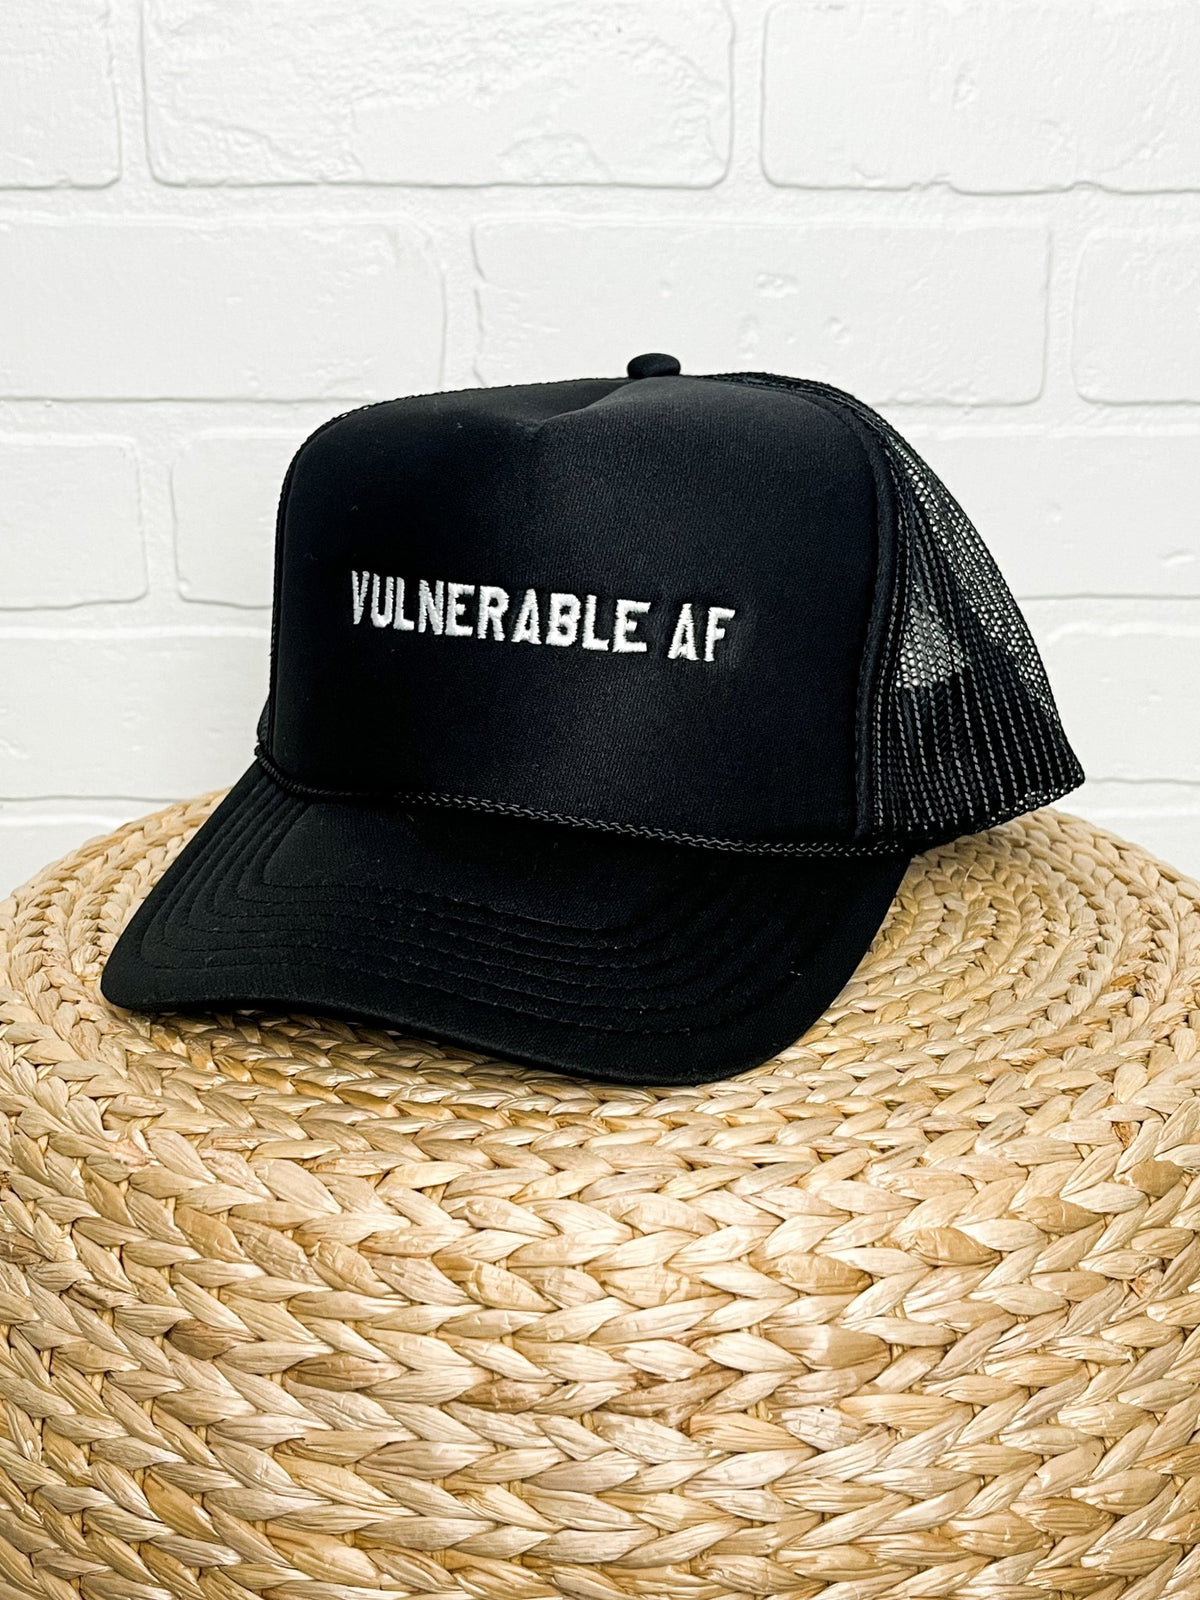 Vulnerable AF trucker hat black - Trendy Hats at Lush Fashion Lounge Boutique in Oklahoma City